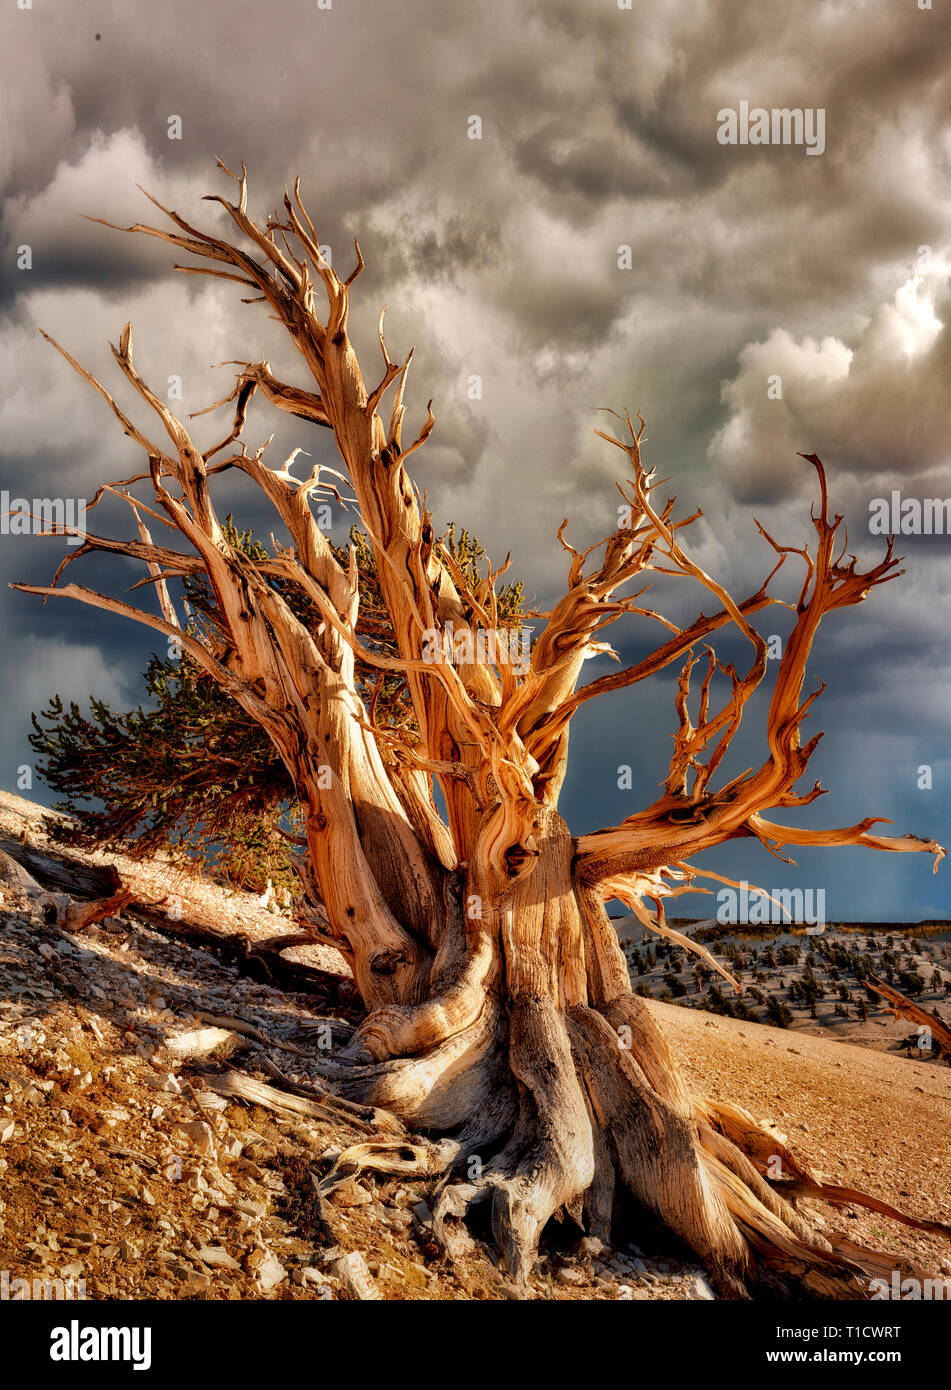 Widely branching Bristlecone Pine. Ancient Bristlecone Pine Forest, California. Stock Photo